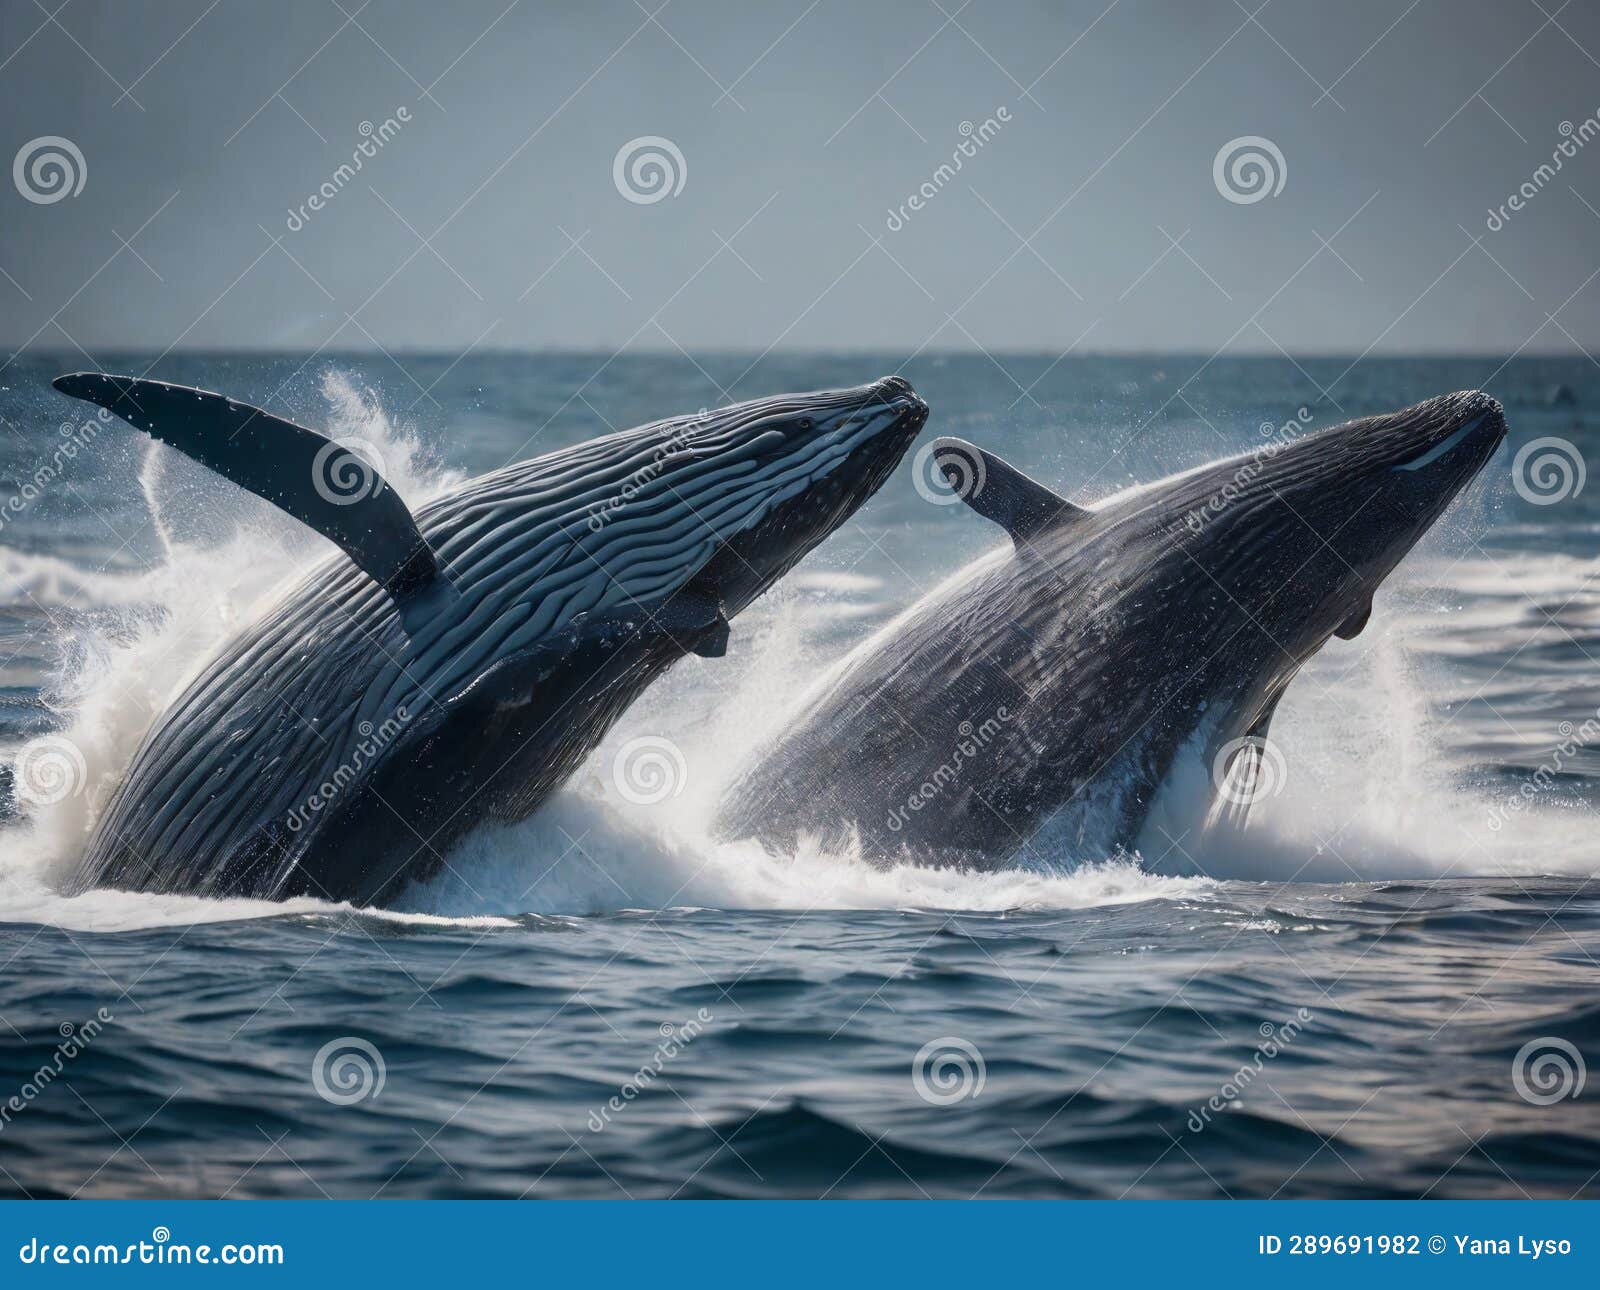 Two Large Whales Jump Out of the Water. Marine Mammals, Cetaceans Stock ...